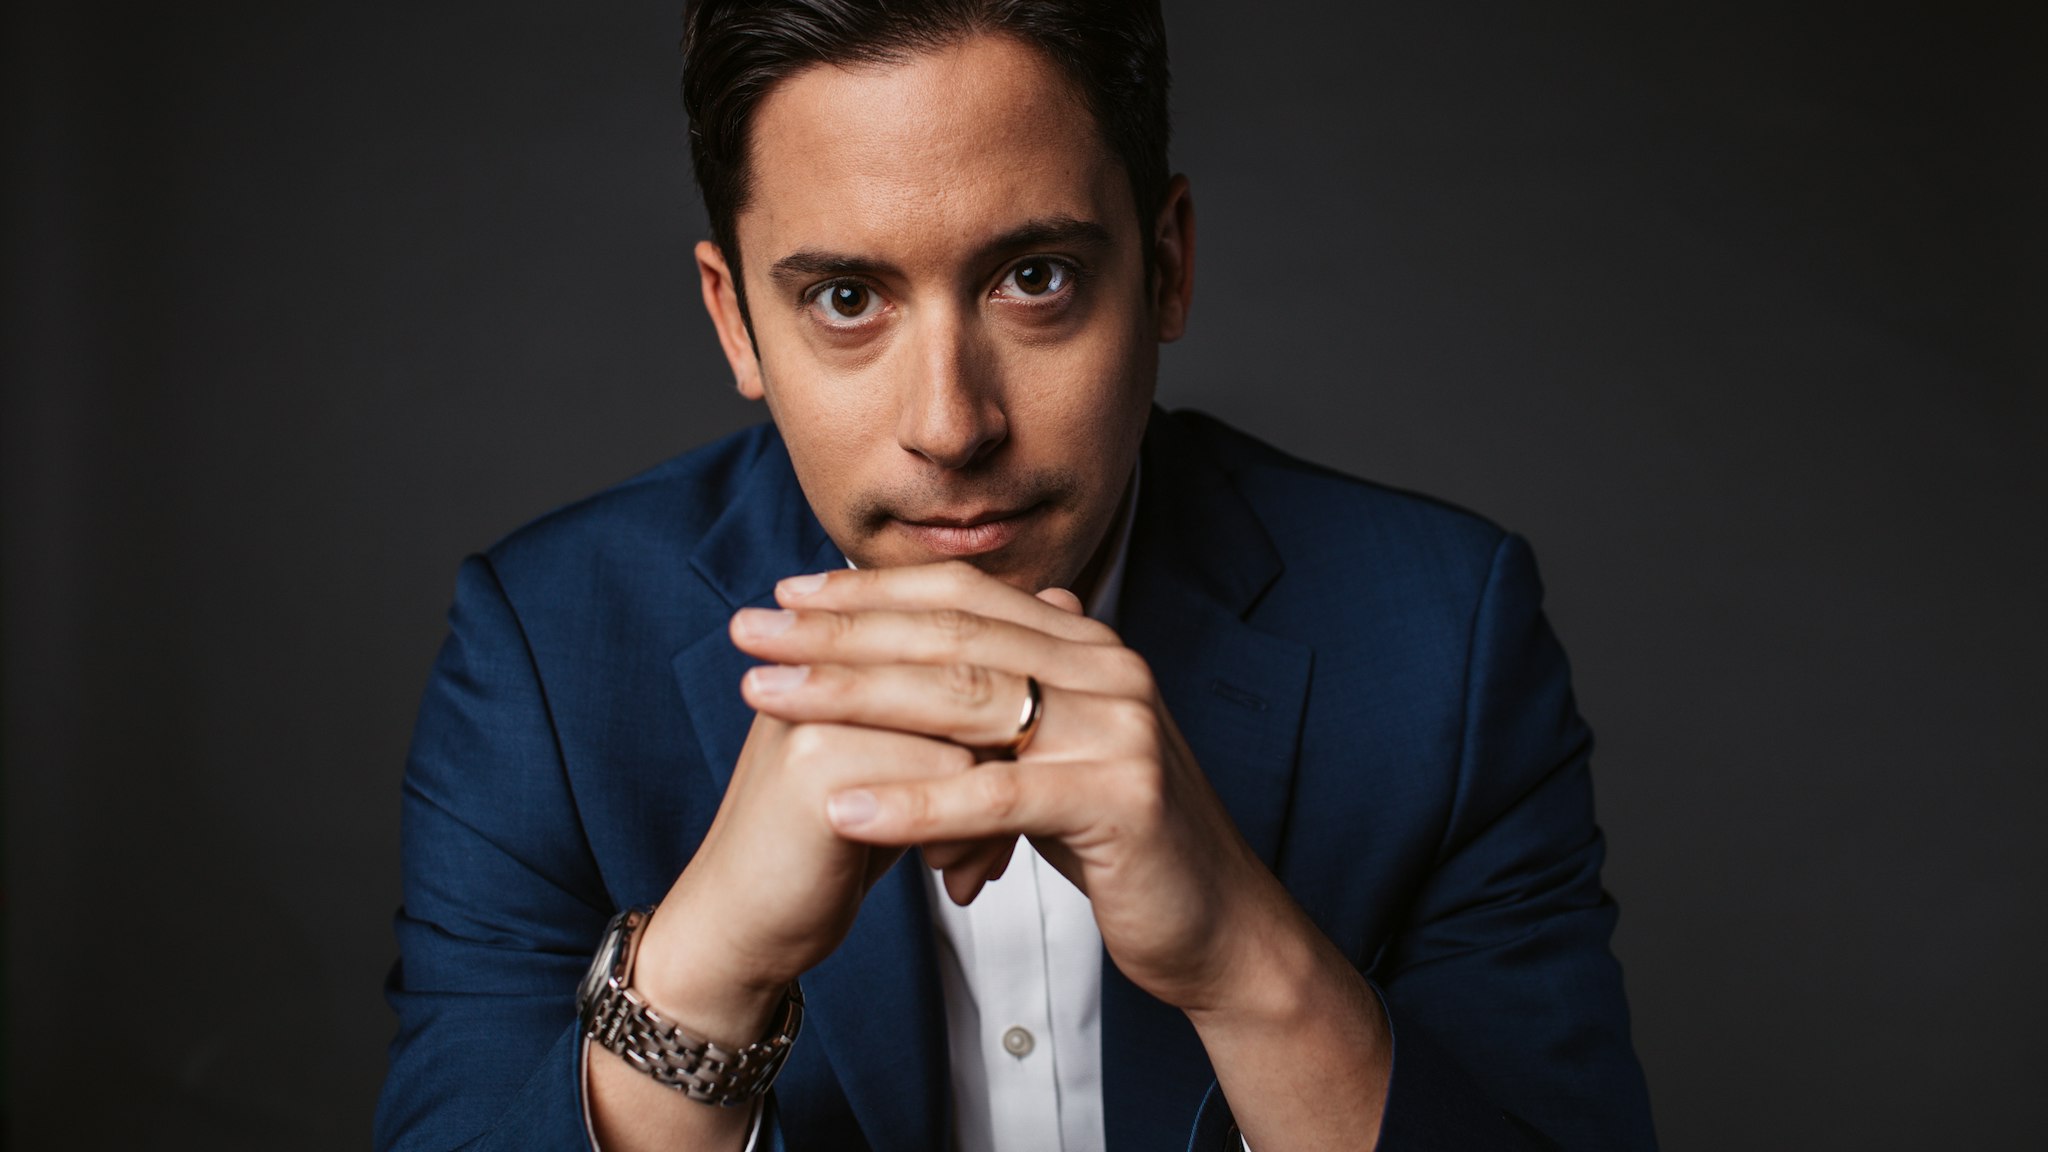 Michael Knowles, host of The Michael Knowles Show. G. Woodman/DailyWire+